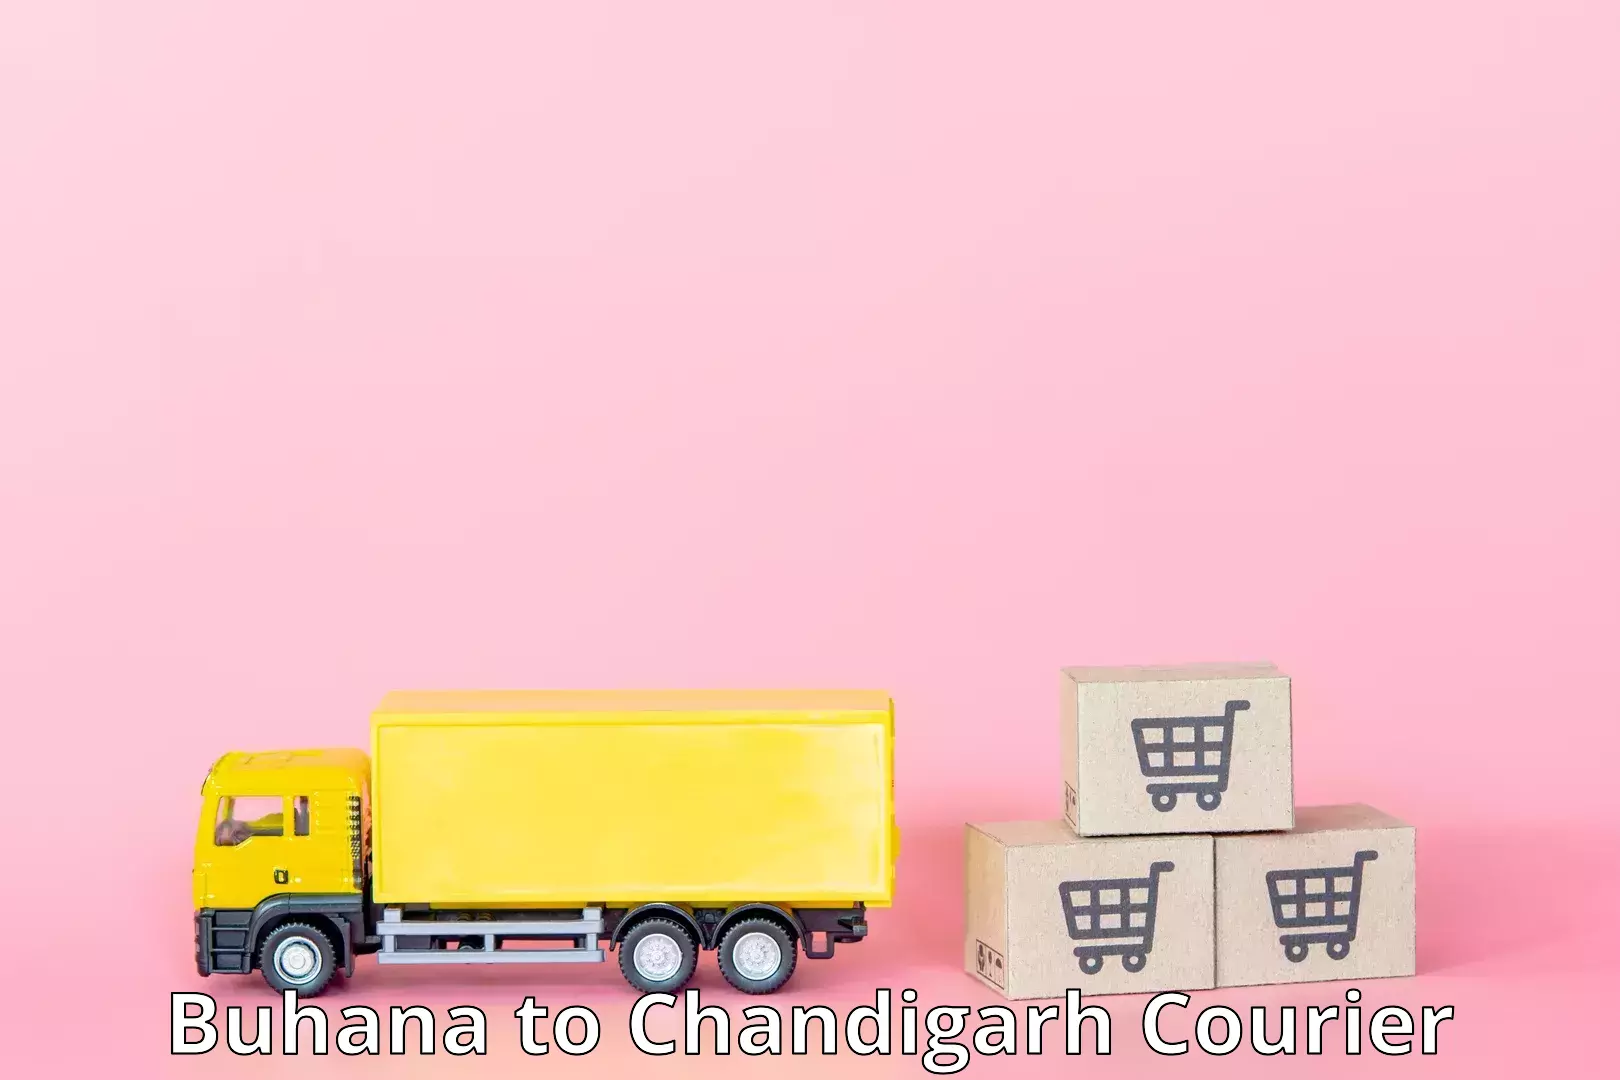 Personal parcel delivery in Buhana to Chandigarh